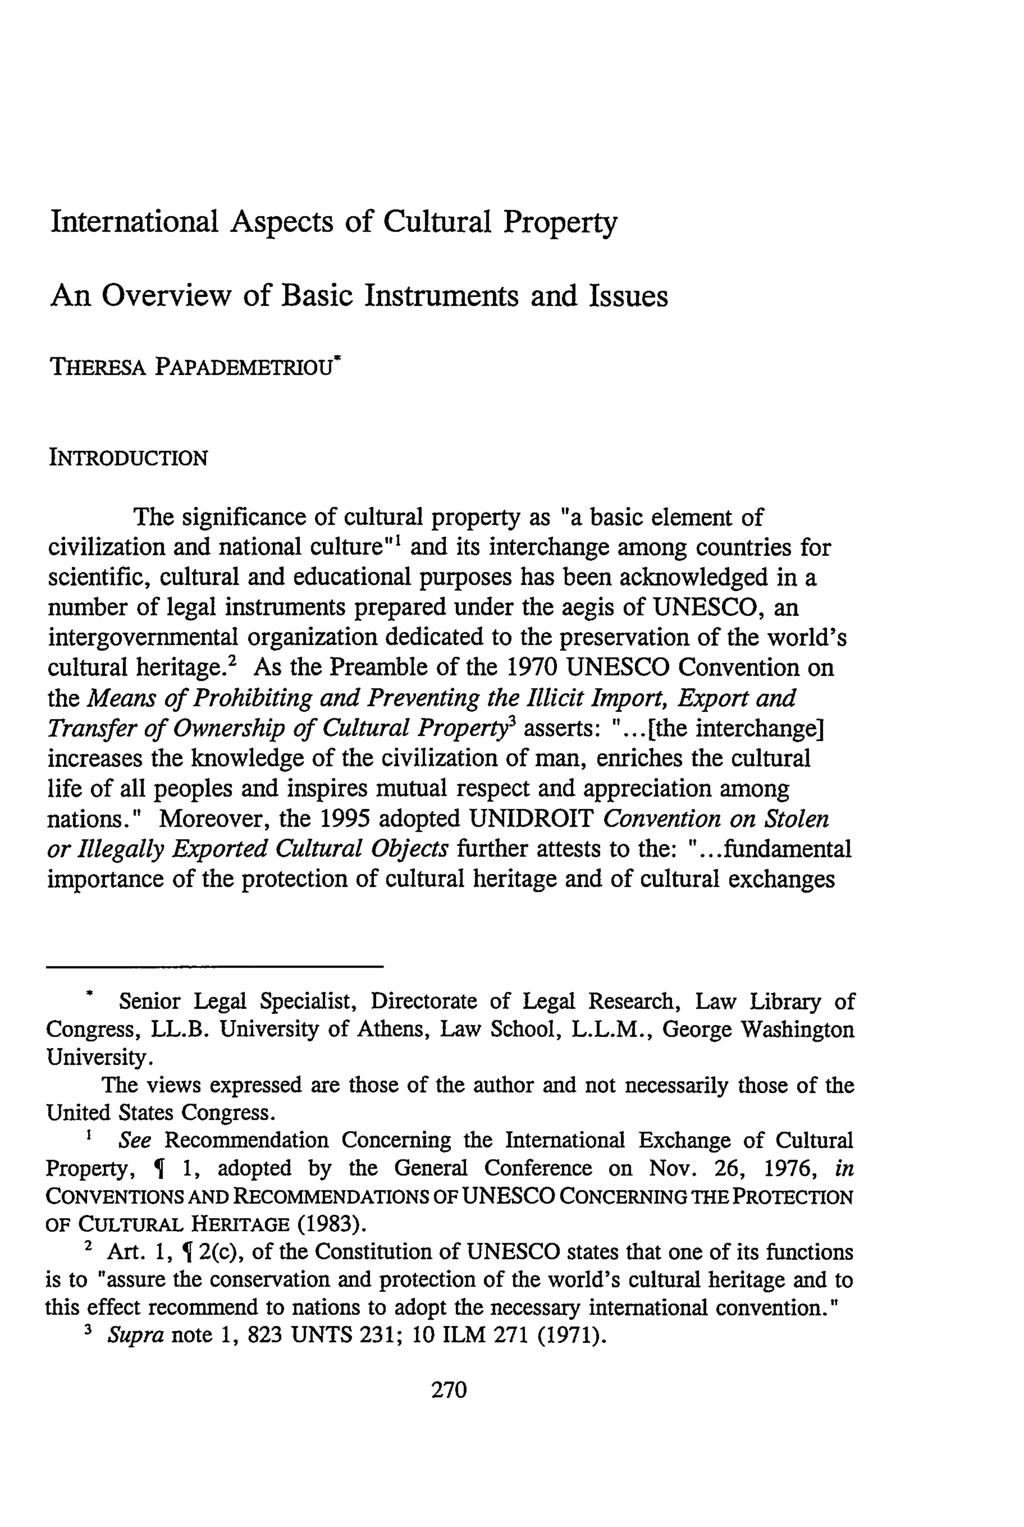 International Aspects of Cultural Property An Overview of Basic Instruments and Issues THERESA PAPADEMETRIOU* INTRODUCTION The significance of cultural property as "a basic element of civilization